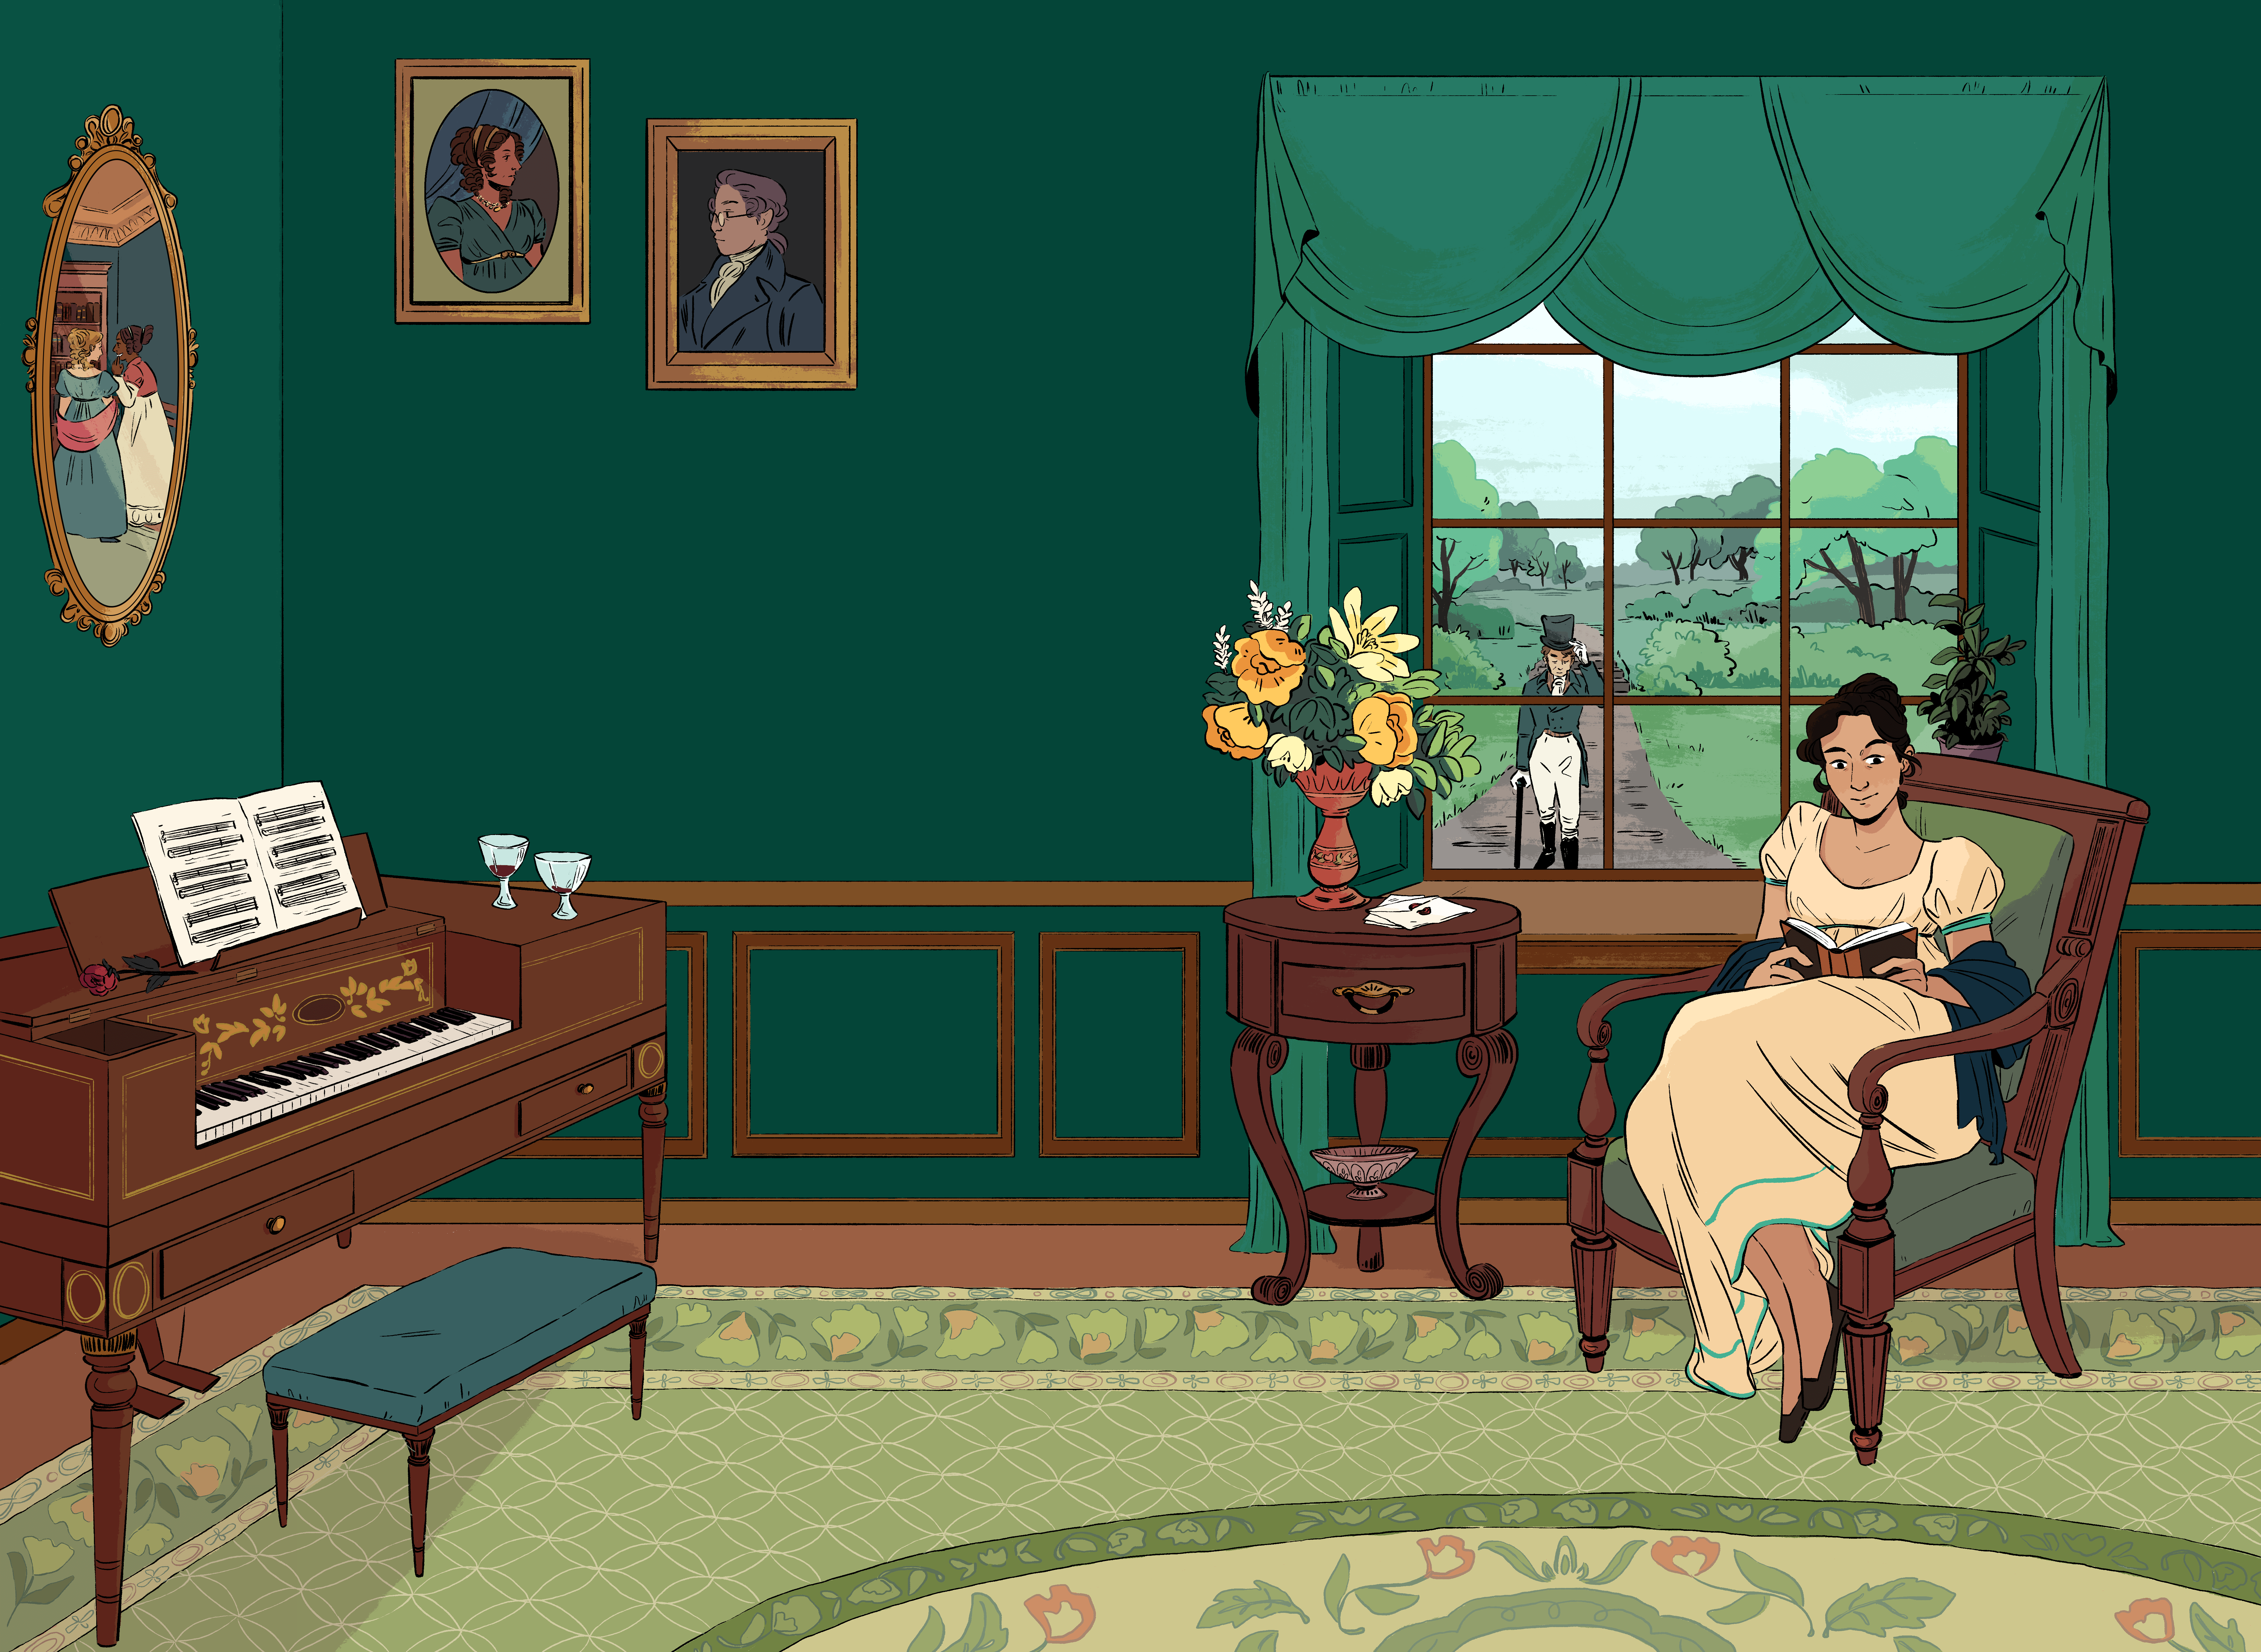 illustration of a young 18th century woman reading a book in a green parlor room